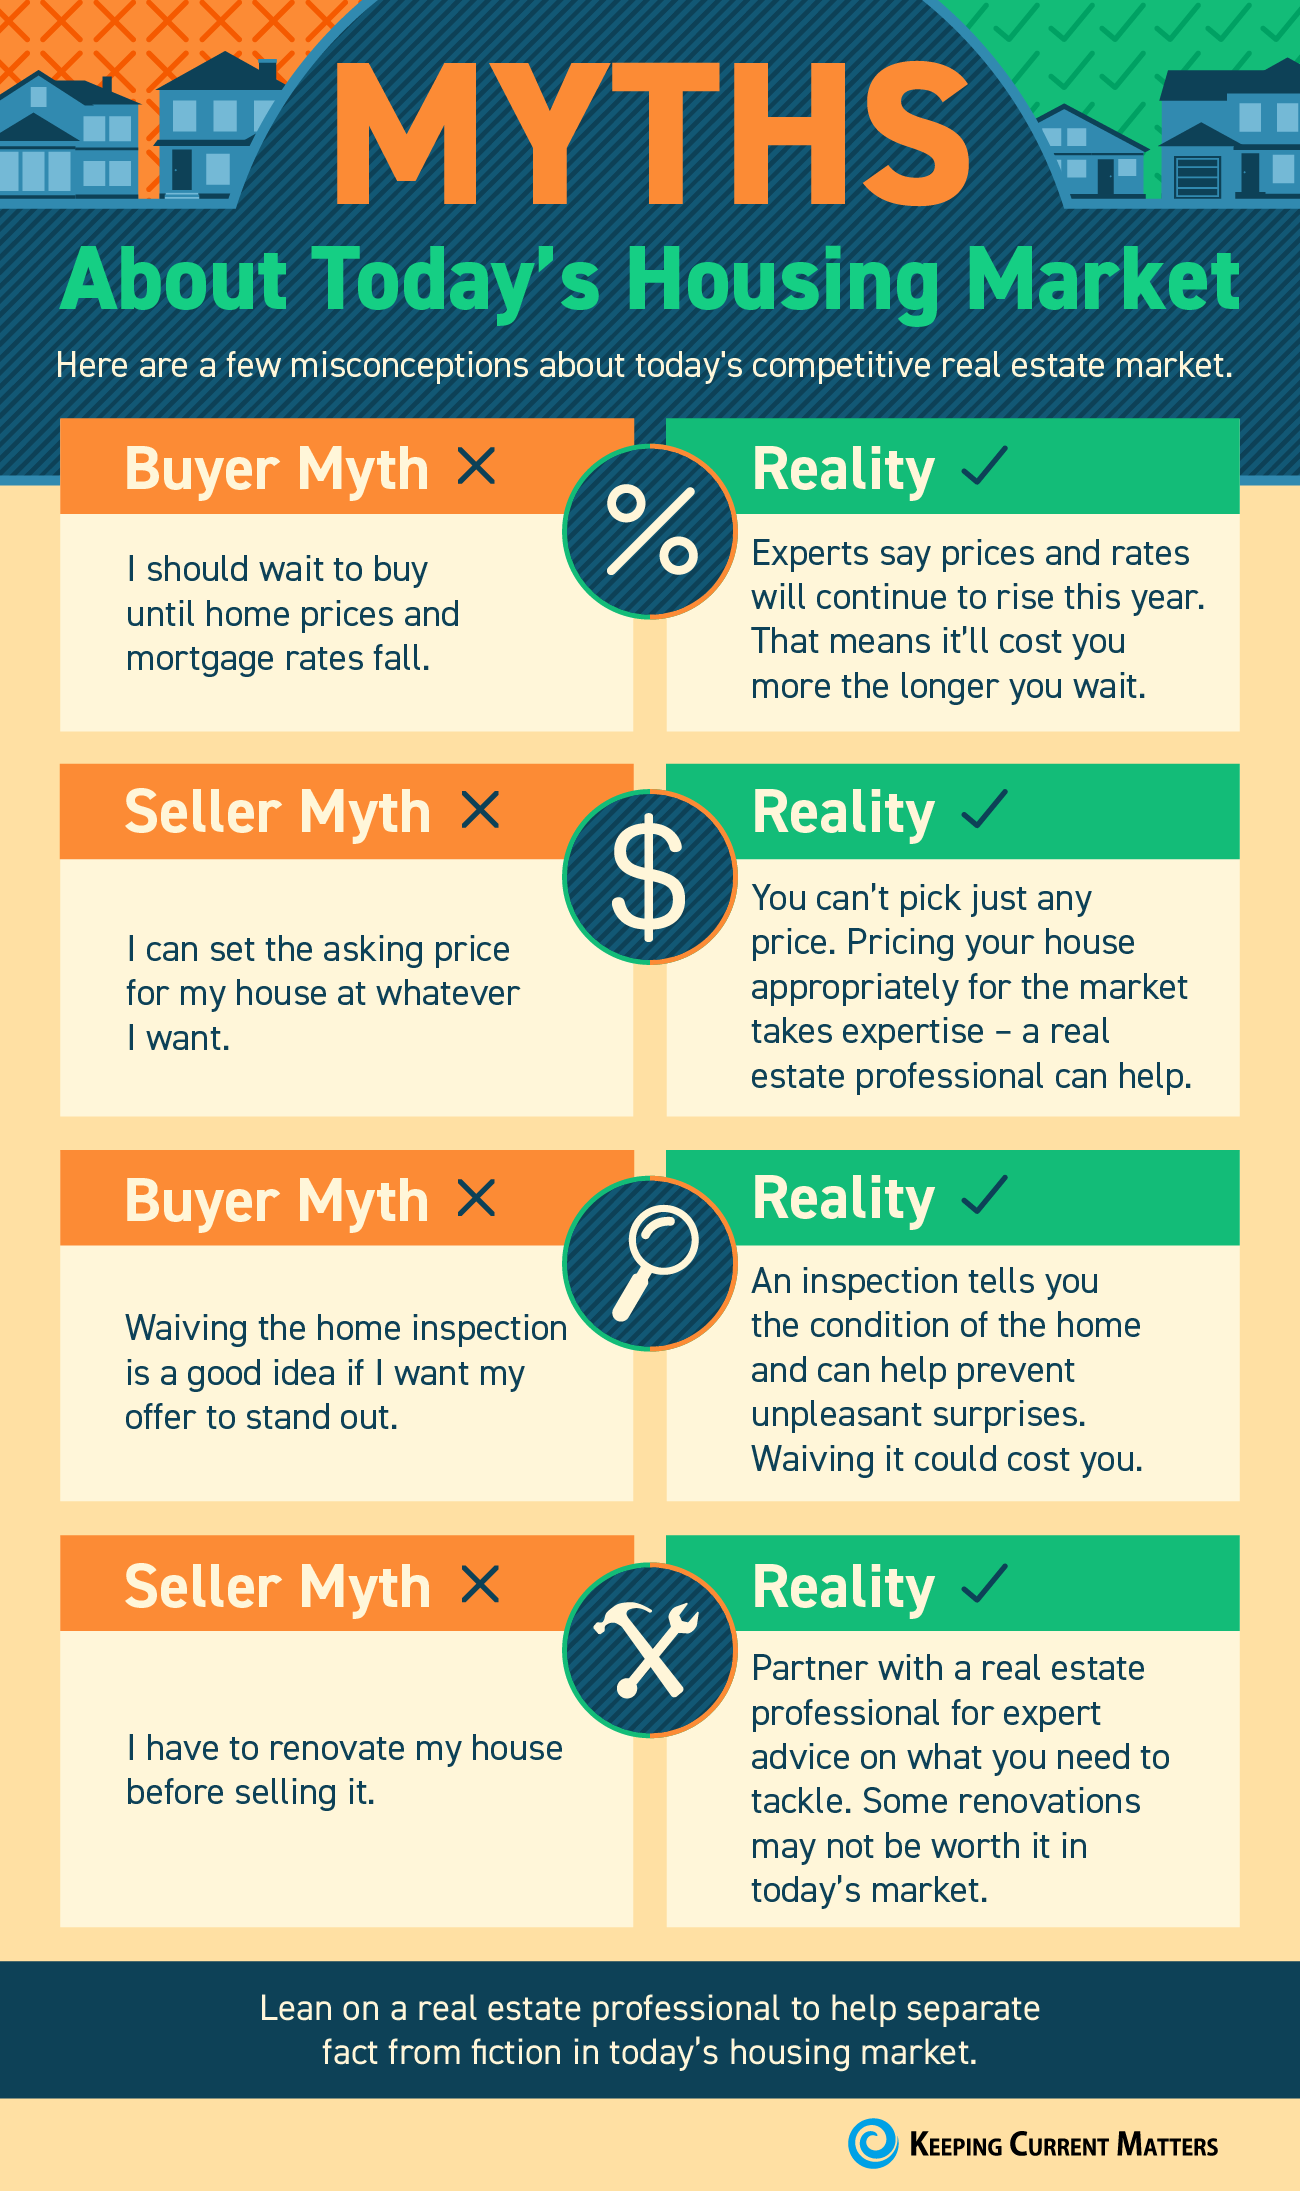 Myths About Today’s Housing Market [INFOGRAPHIC] | Keeping Current Matters